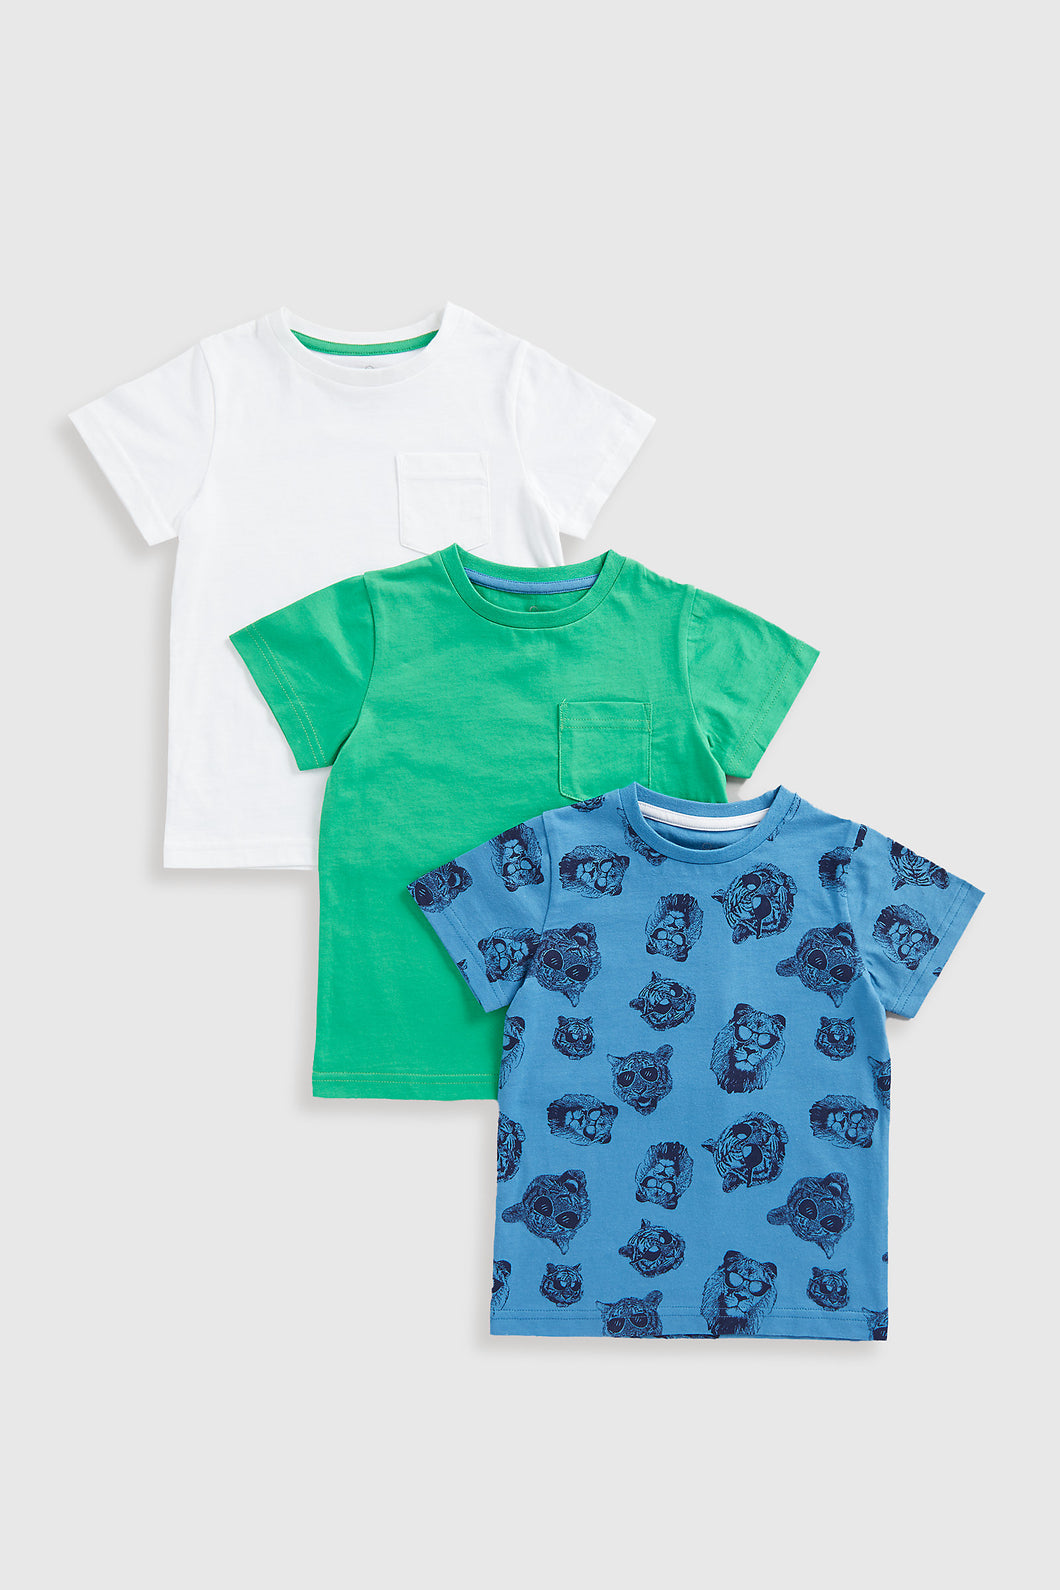 Mothercare Big Cat T-Shirts - 3 Pack